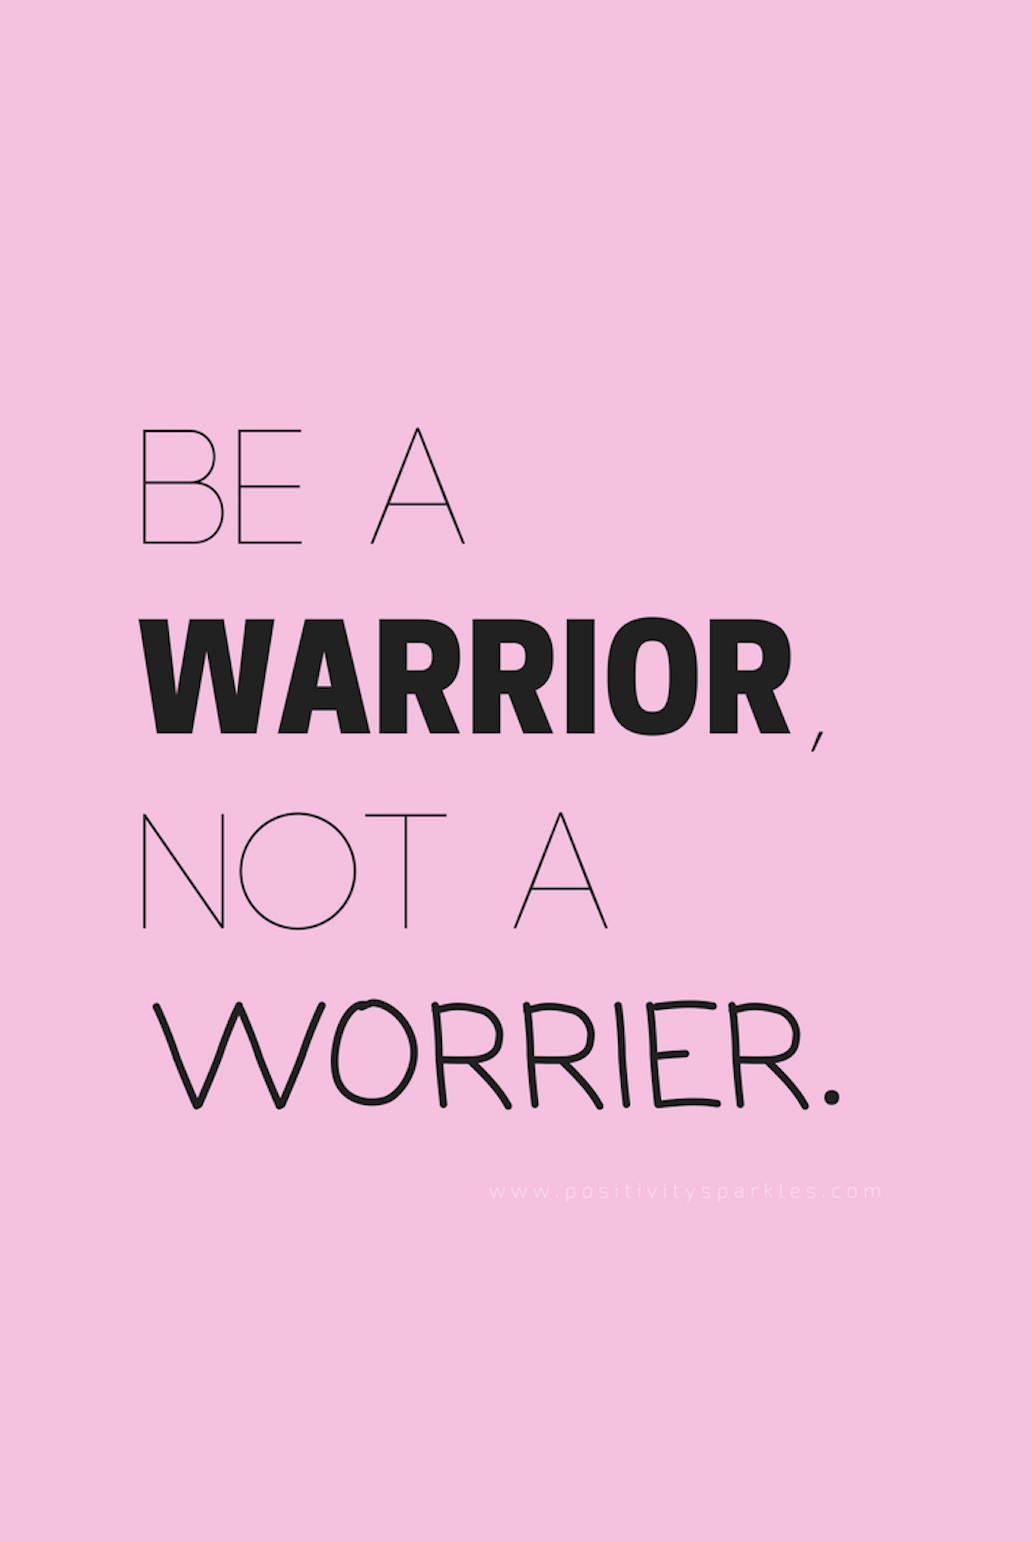 Positive Anxiety Quotes
 "Be a warrior not a worrier " Positivity Sparkles